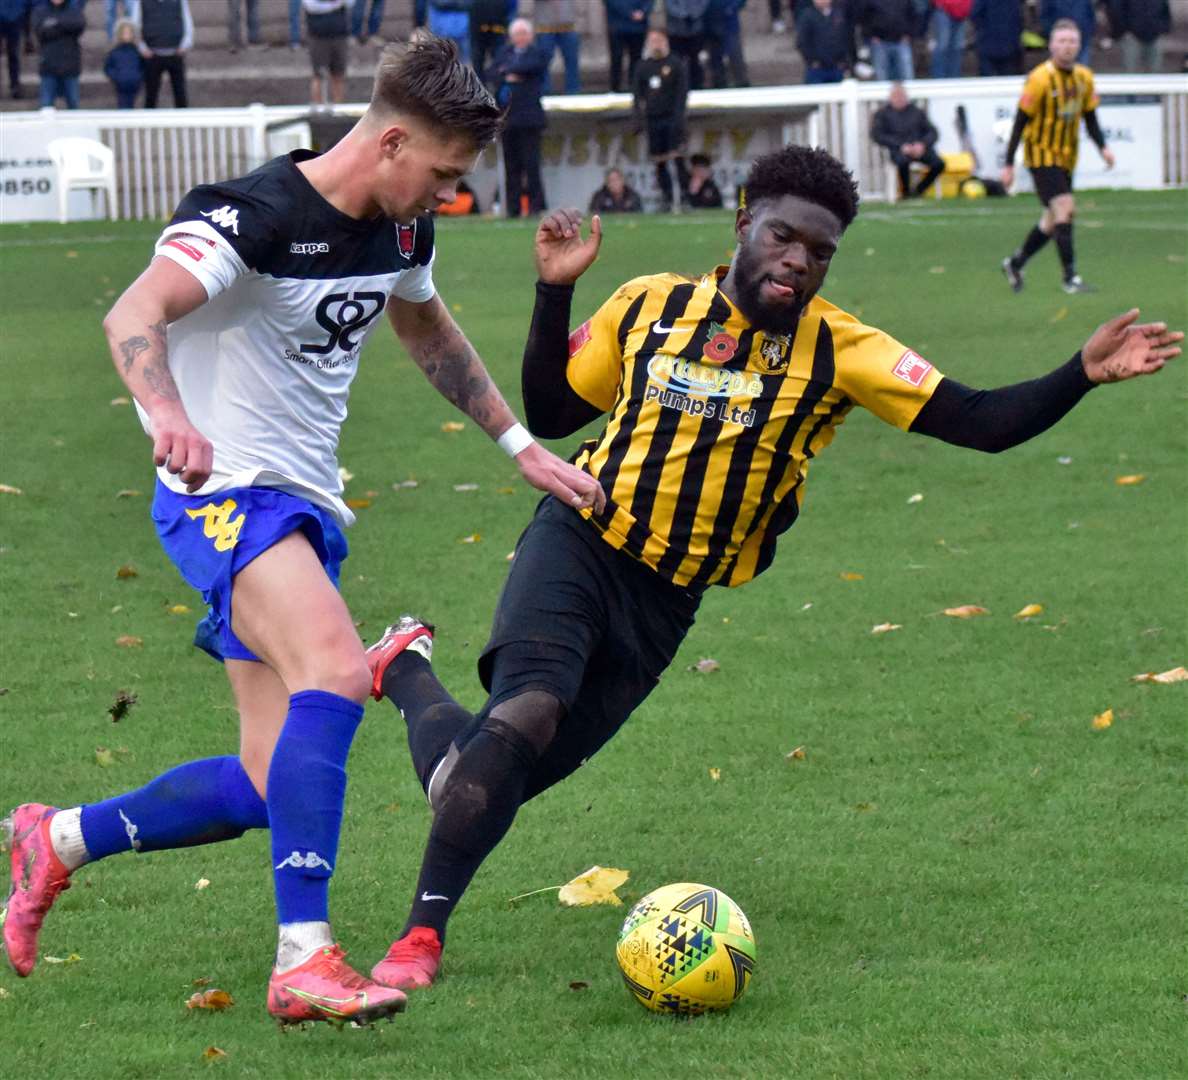 Faversham Town's Clark Woodcock on the ball against Folkestone in the FA Trophy during the Lilywhites' defeat last weekend. Picture: Randolph File